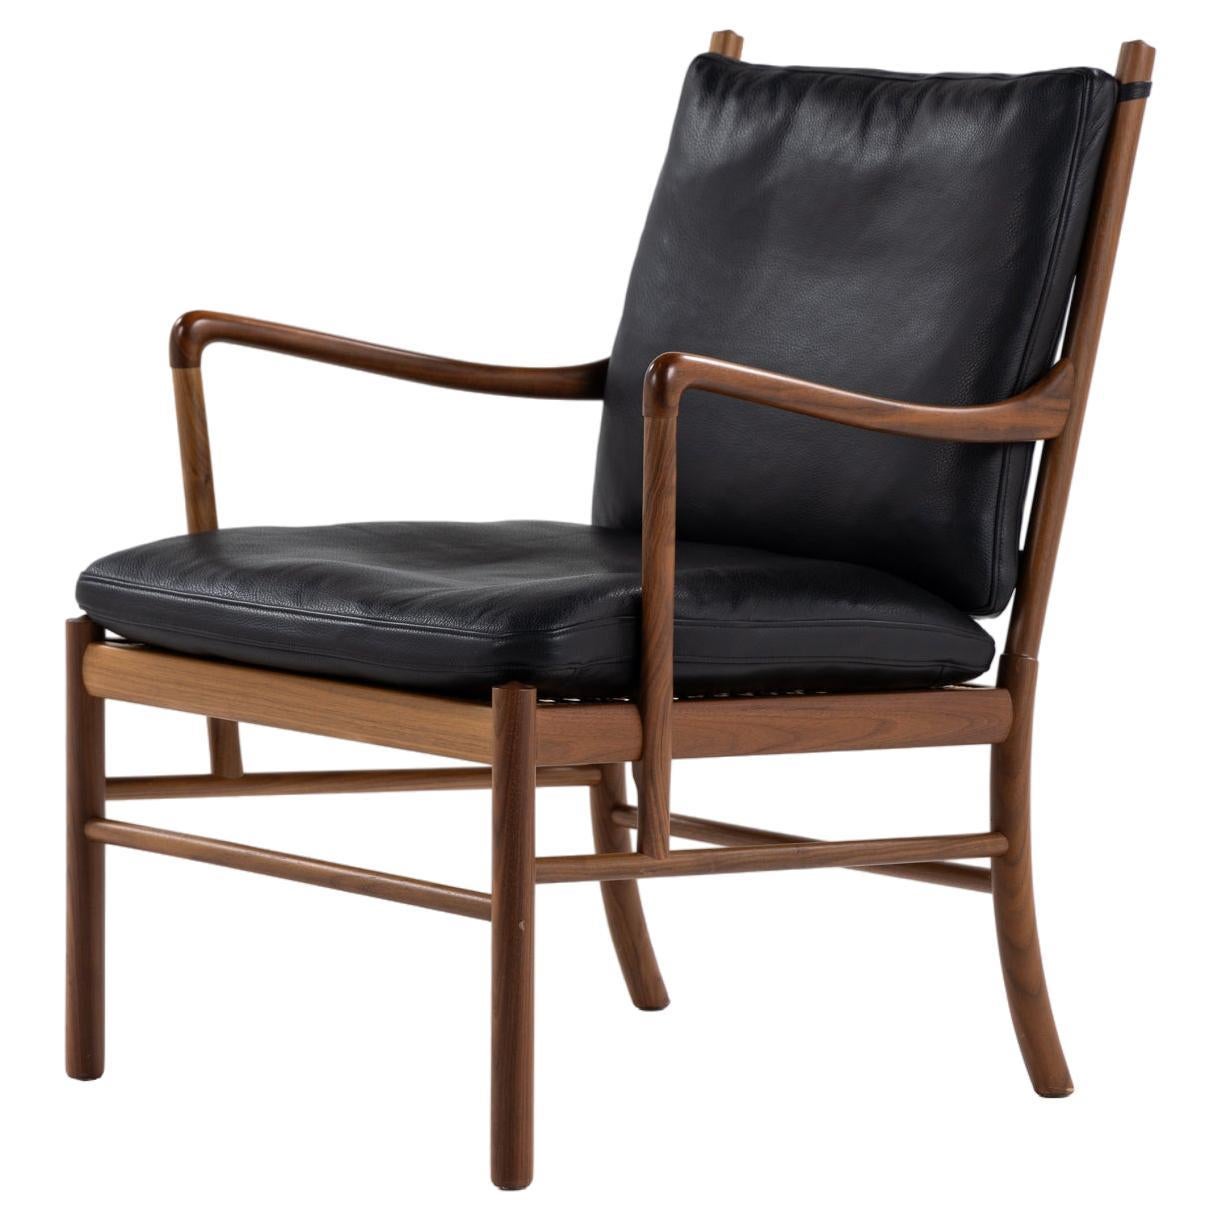 PJ 149 - 'Colonial chair' in black leather and walnut by Ole Wanscher For Sale